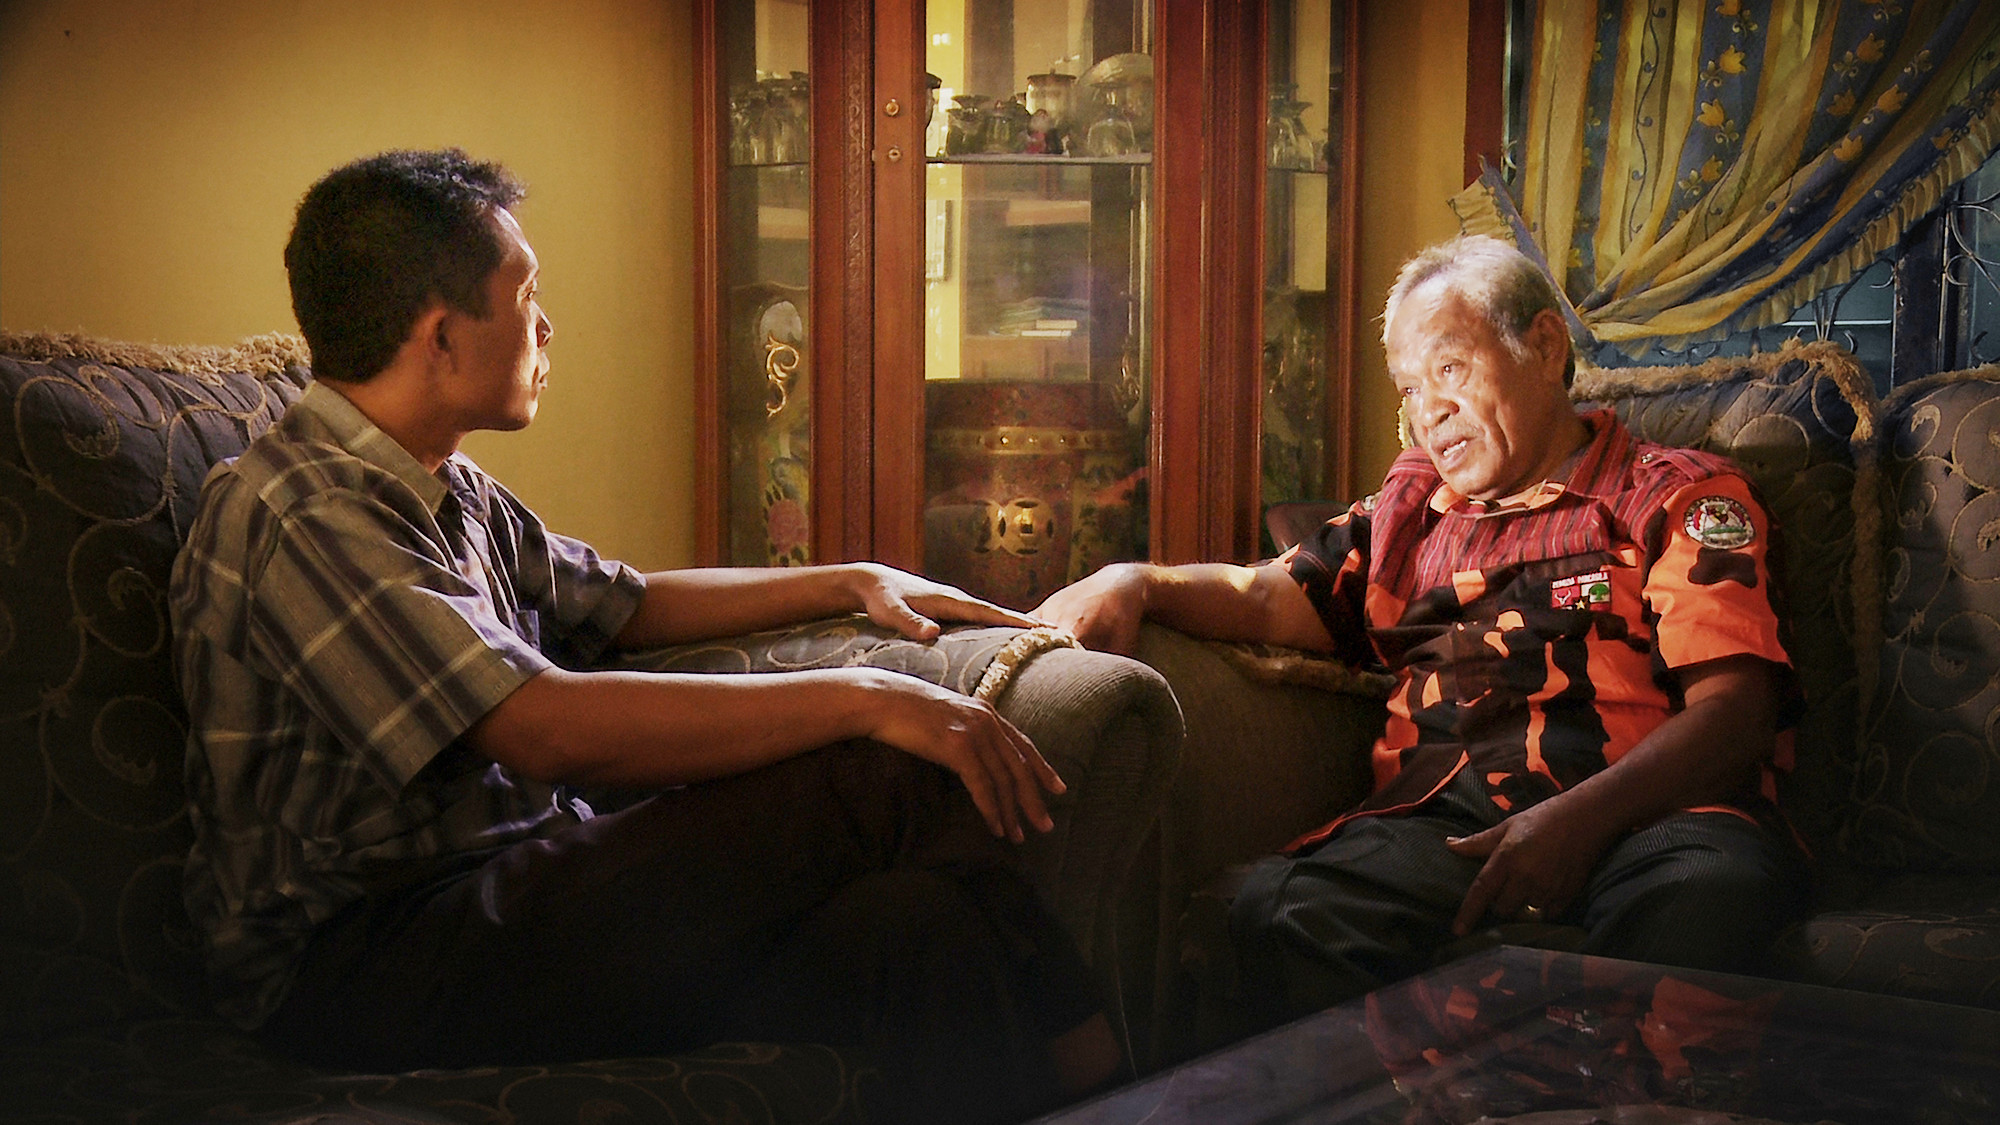 Adi questions Commander Amir Siahaan, one of the death squad leaders responsible for his brother’s death during the Indonesian genocide, in Joshua Oppenheimer’s documentary "The Look of Silence." (Courtesy of Drafthouse Films and Participant Media)